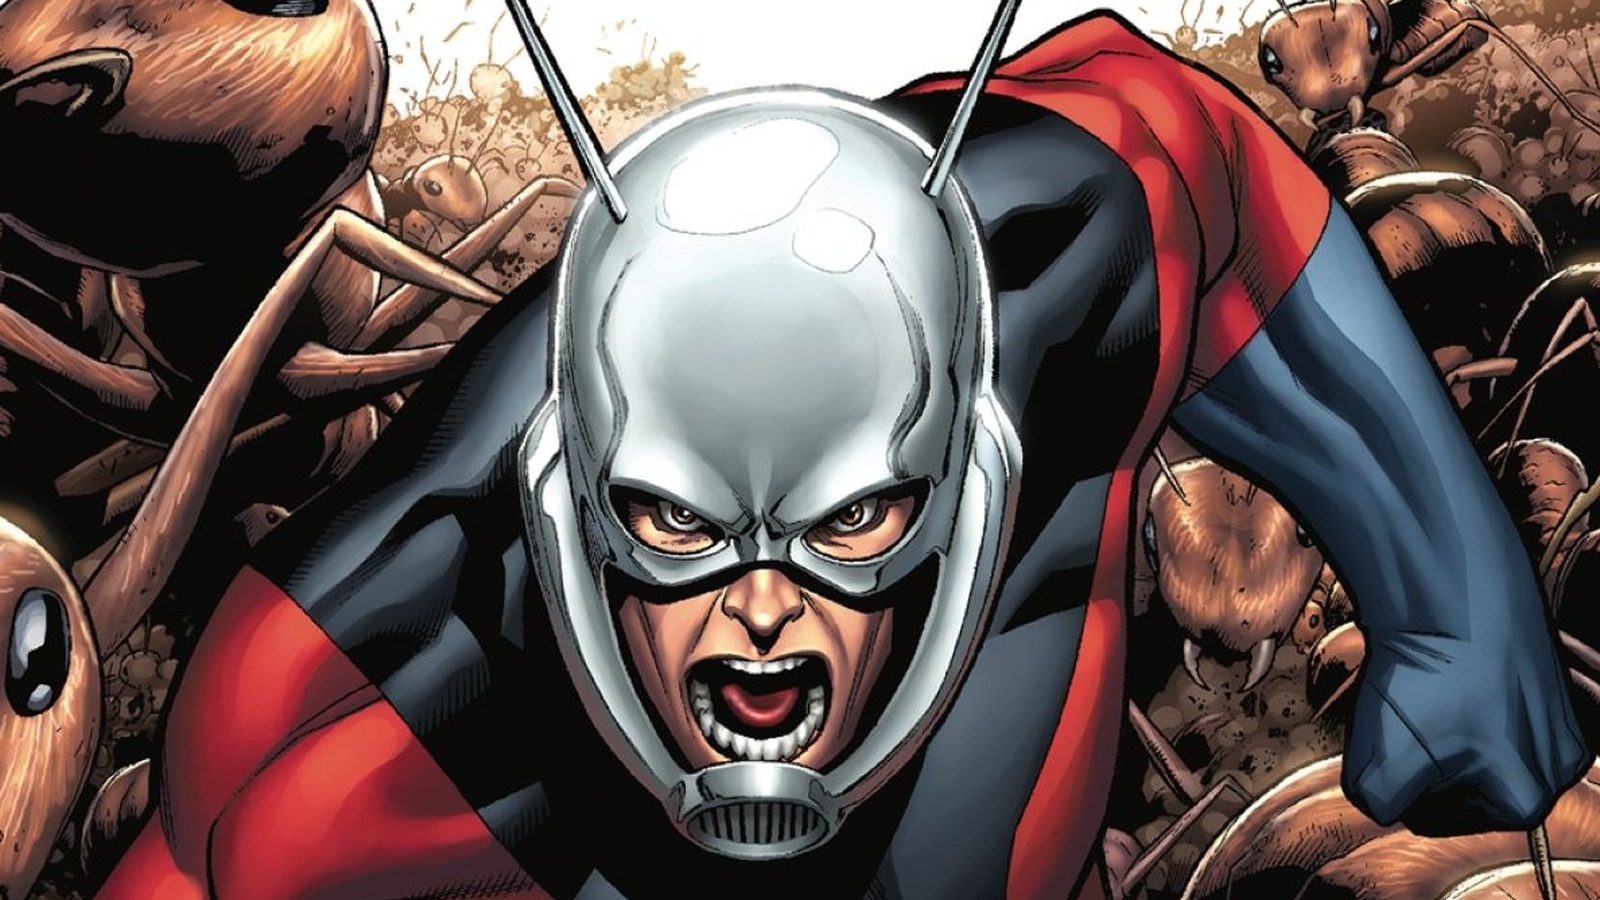 Times Ant Man Wasn T So Heroic